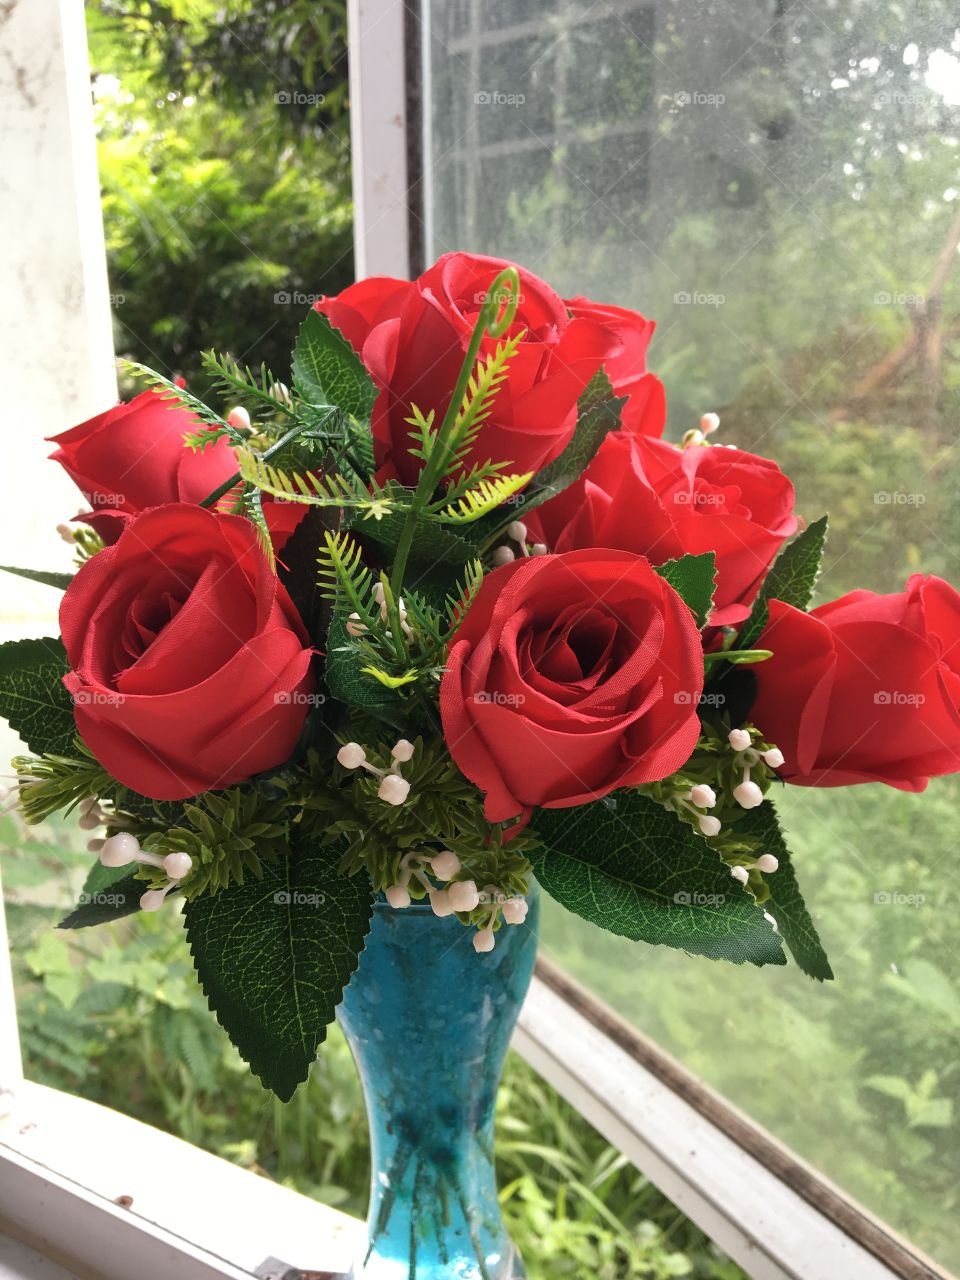 Red roses on the vase